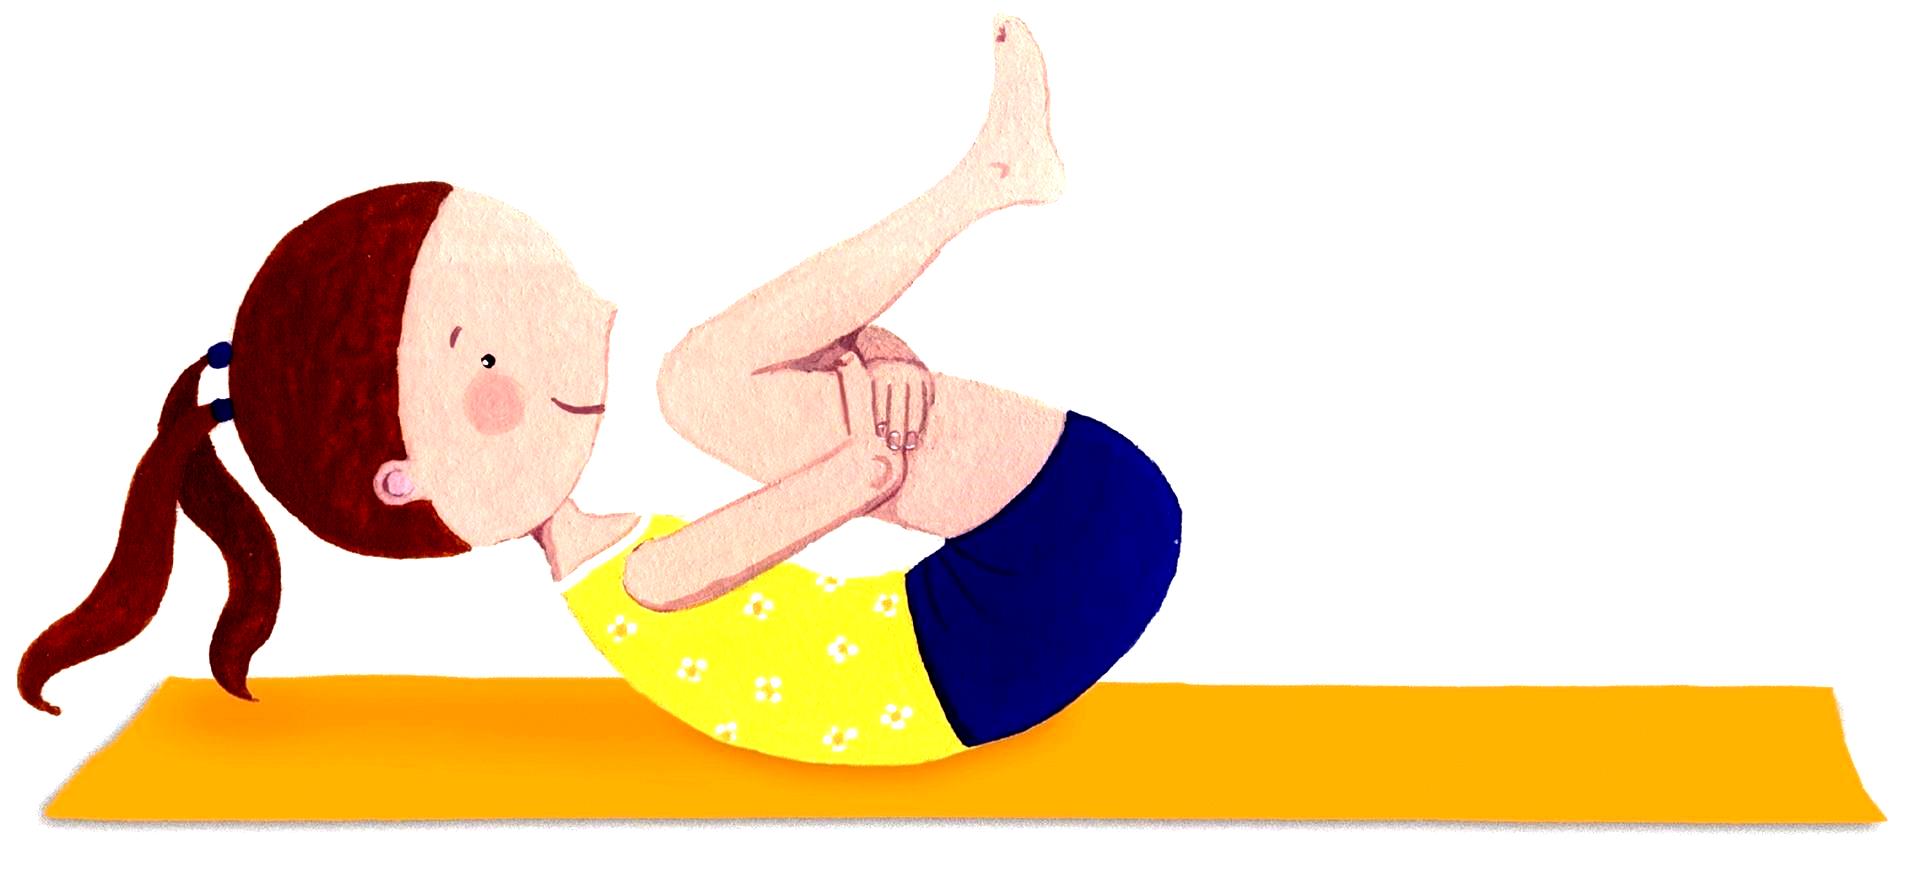 Yoga Poses For Kids - Work Out Picture Media - Work Out Picture Media